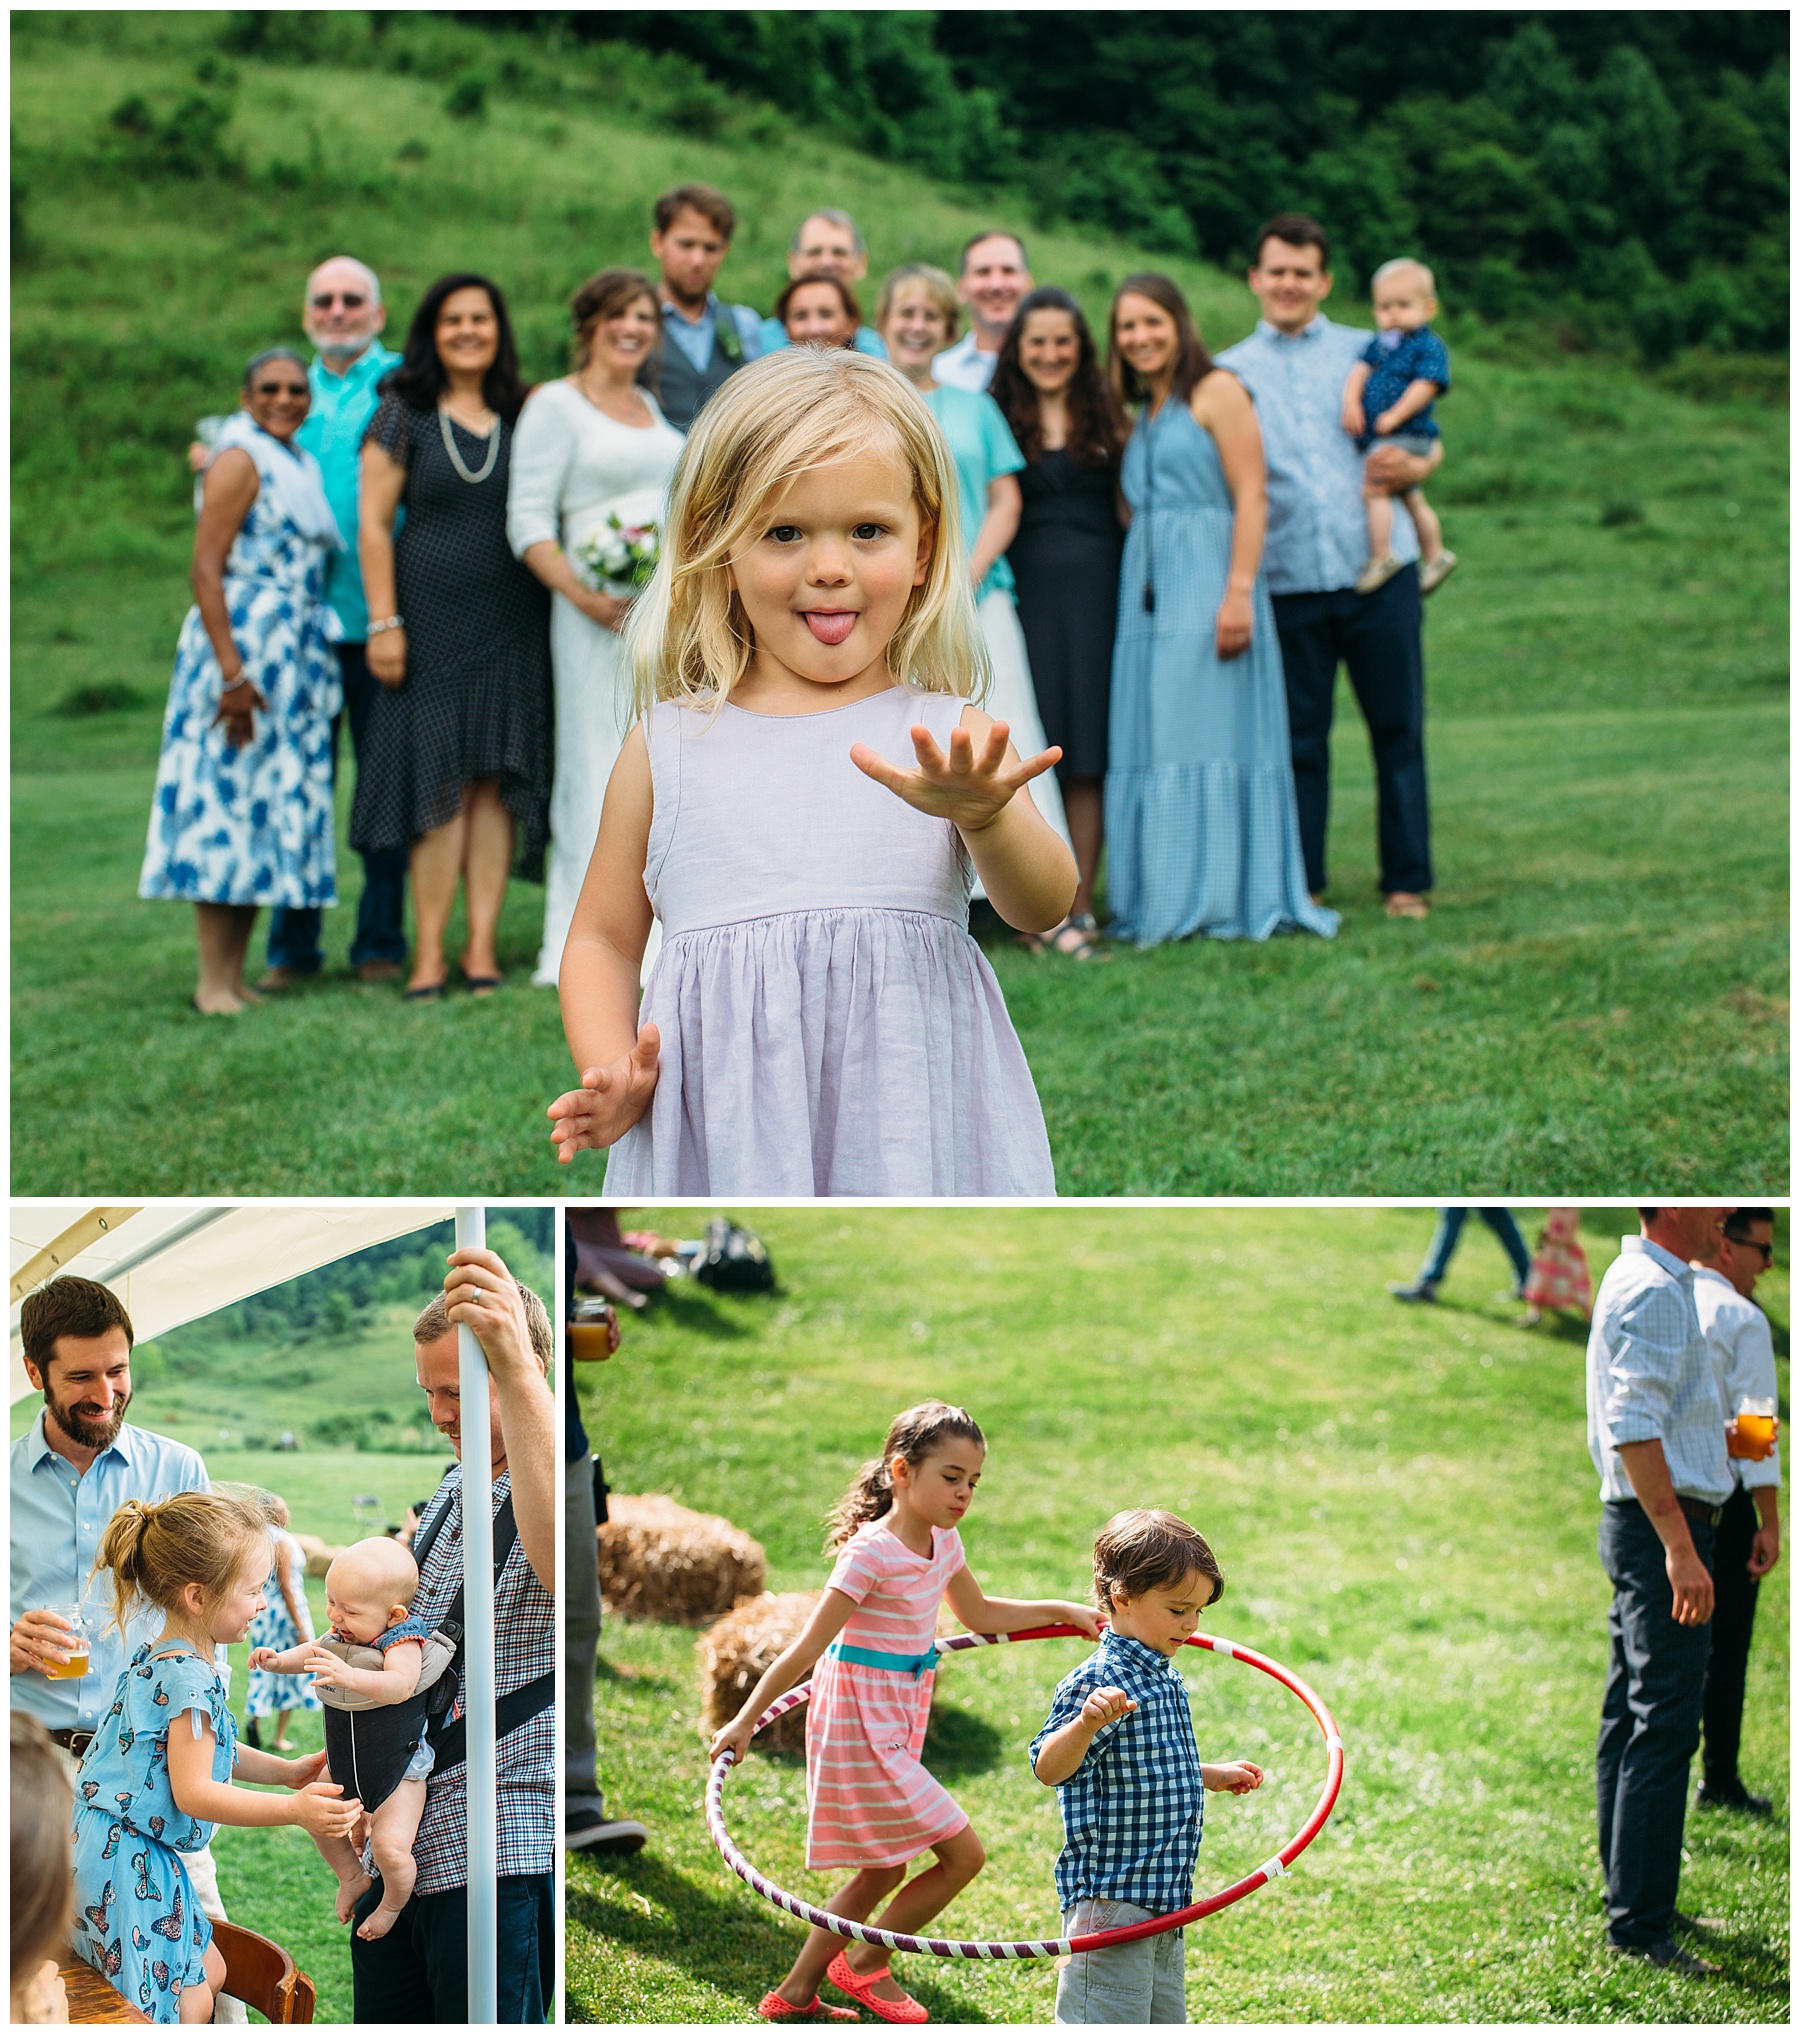 Rustic Laid Back Musician Wedding at White Fence Farm Boone Wedding Photographer